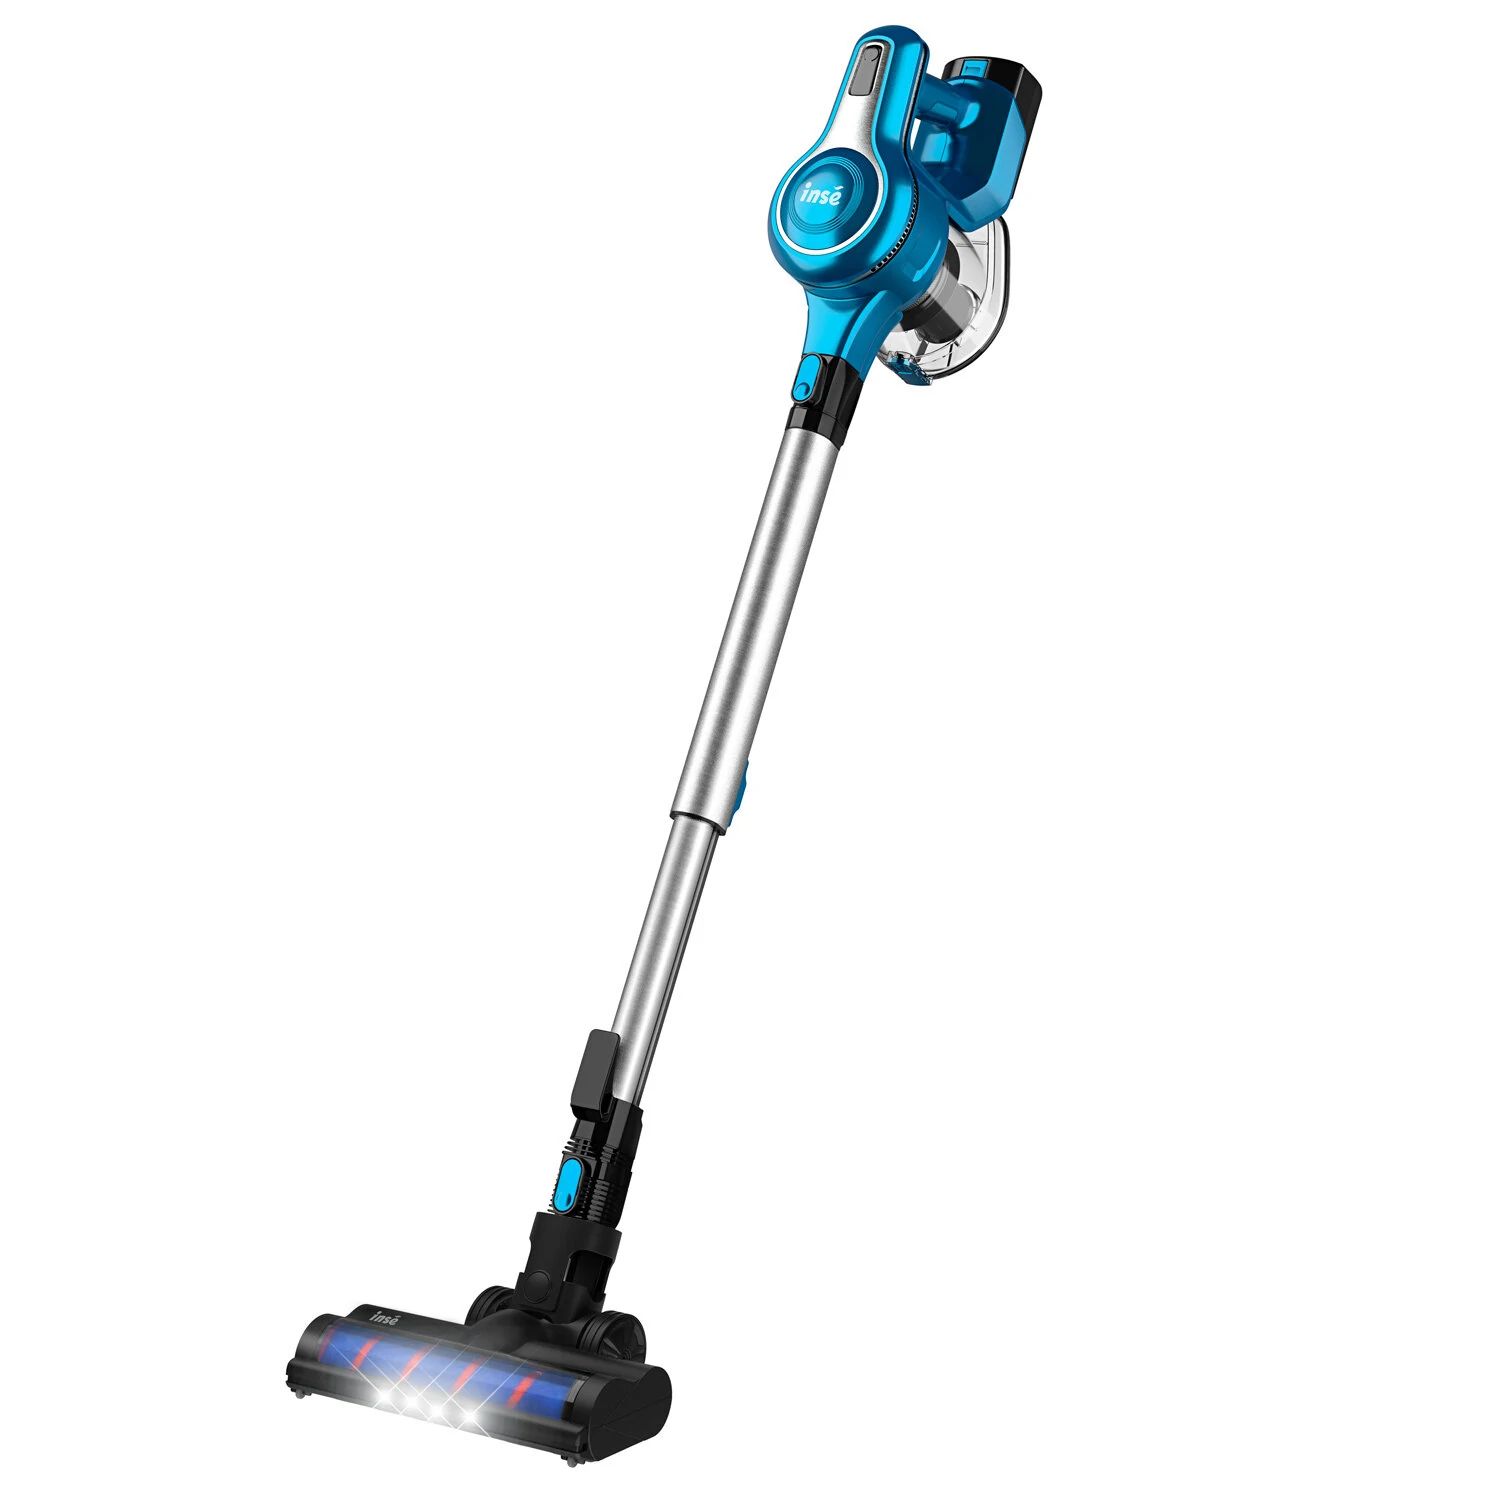 INSE S6 Cordless Vacuum Cleaner 23KPa Suction Power 120000RPM 2 Cleaning Modes 6 Stages High-Efficiency Filtration System Flexible Head with Front LED Light - Blue EU Plug